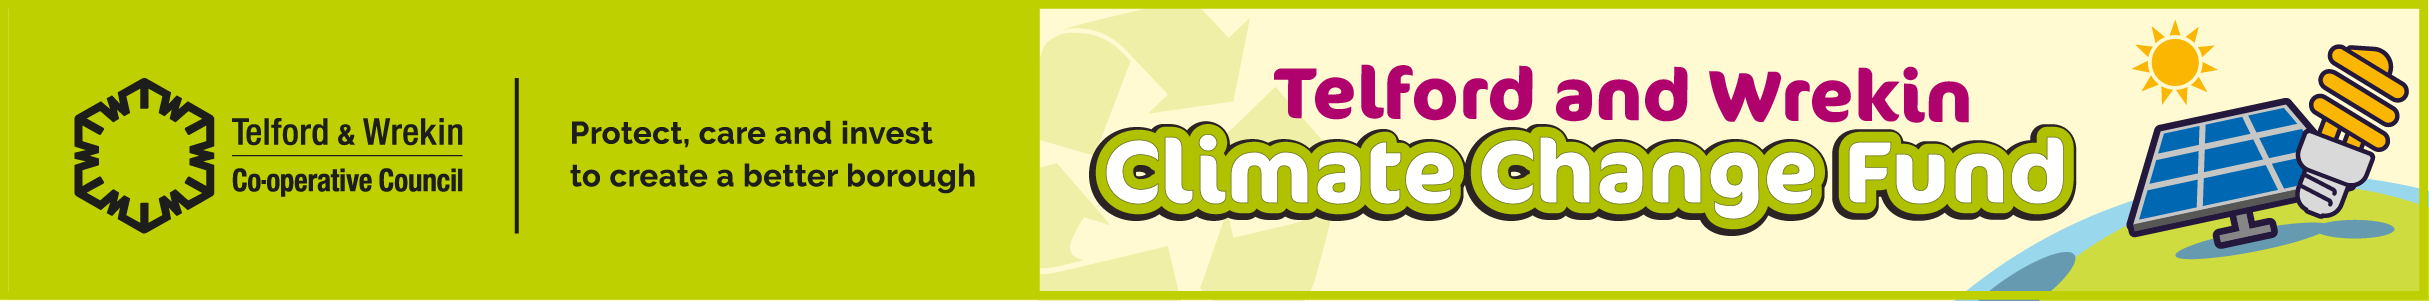 Logo for Telford and Wrekin Climate Change fund